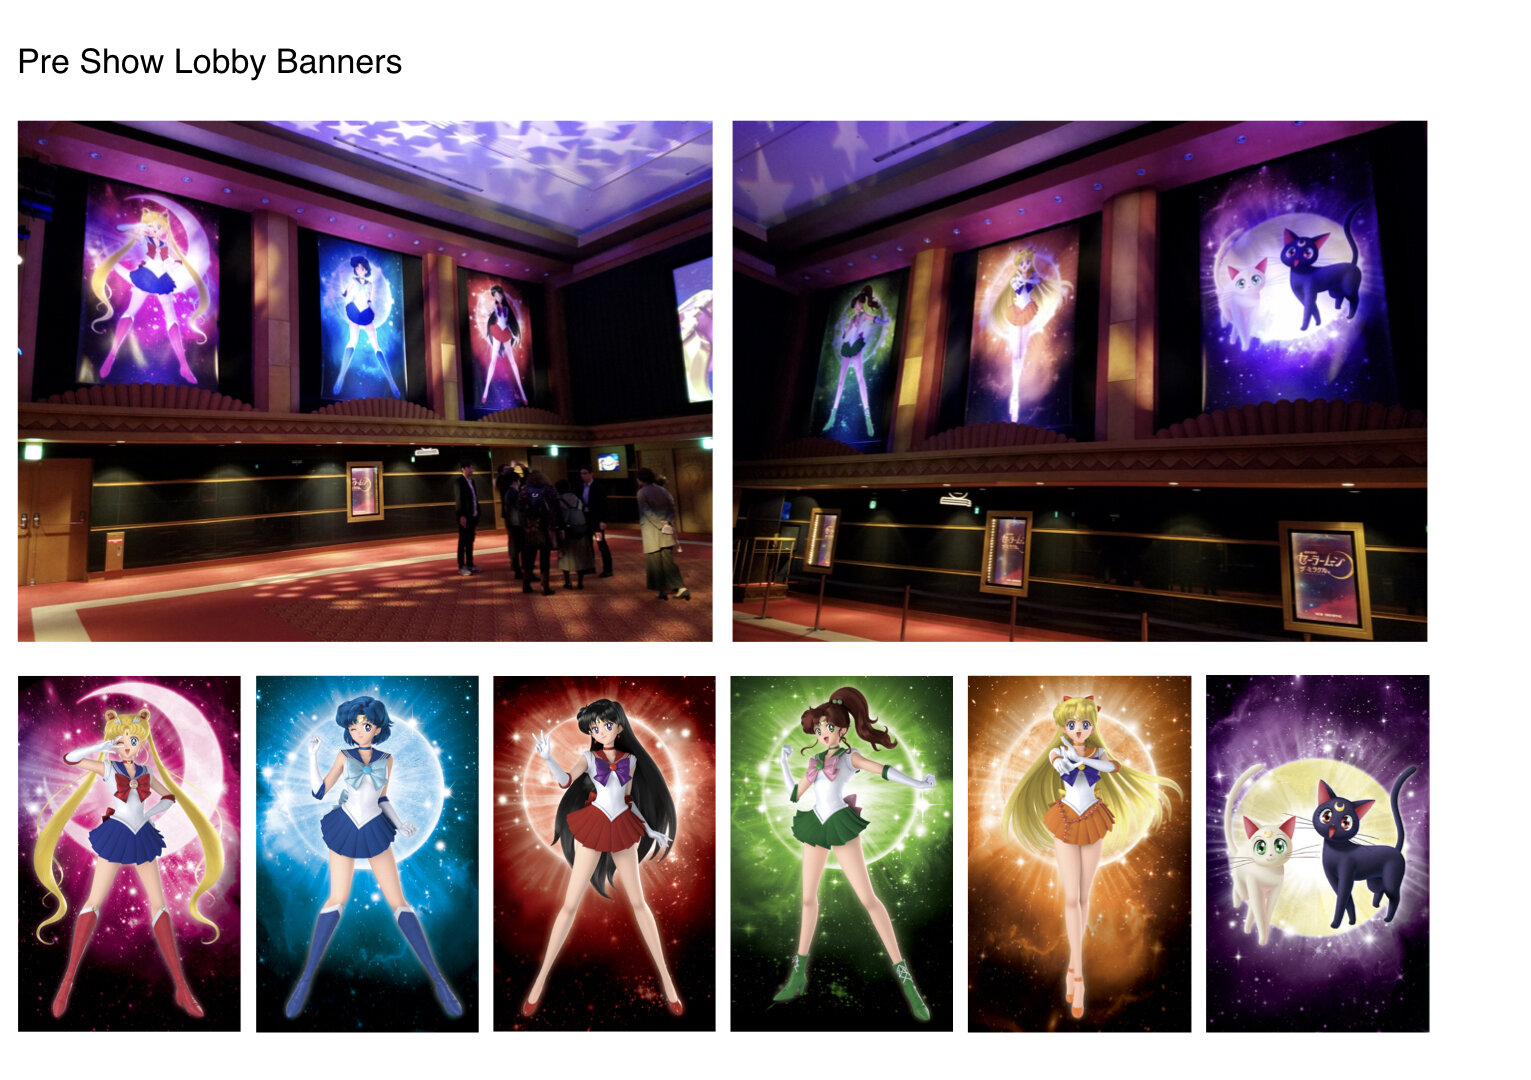  Concept and art direction for large scale banners that hang in the pre show lobby   3D character assets provided by Toei Animation Studio  Addition graphic design by Sunny Teru 